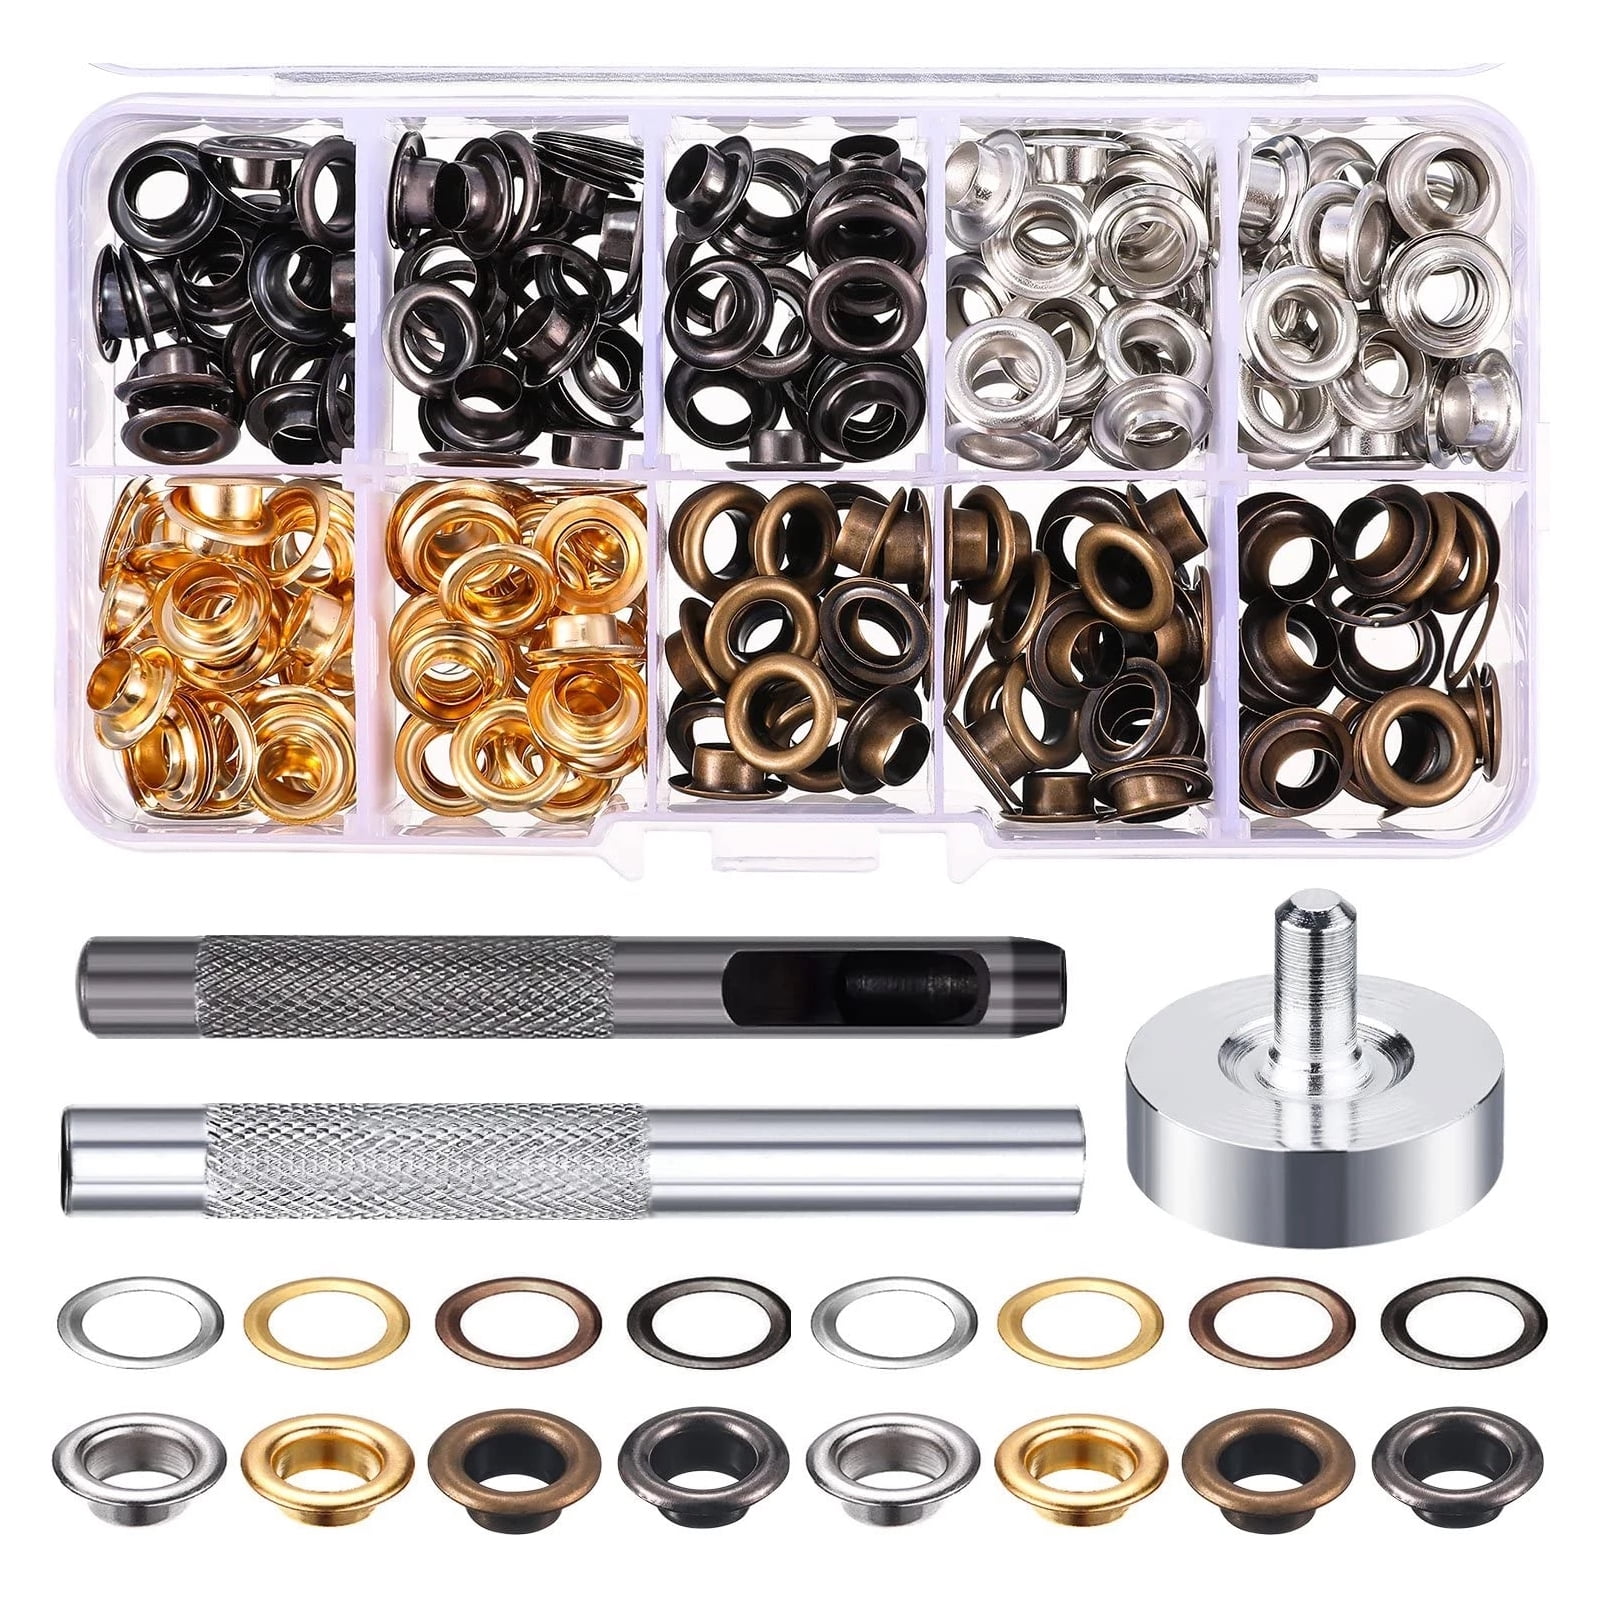 Zxmissu 200 Sets Metal Grommets Eyelets 1/2 1/4 2/5 3/16 with Washers and Storage Box, Grommet Tool Kit Eyelets and Grommets for Fabric Belt Clothes